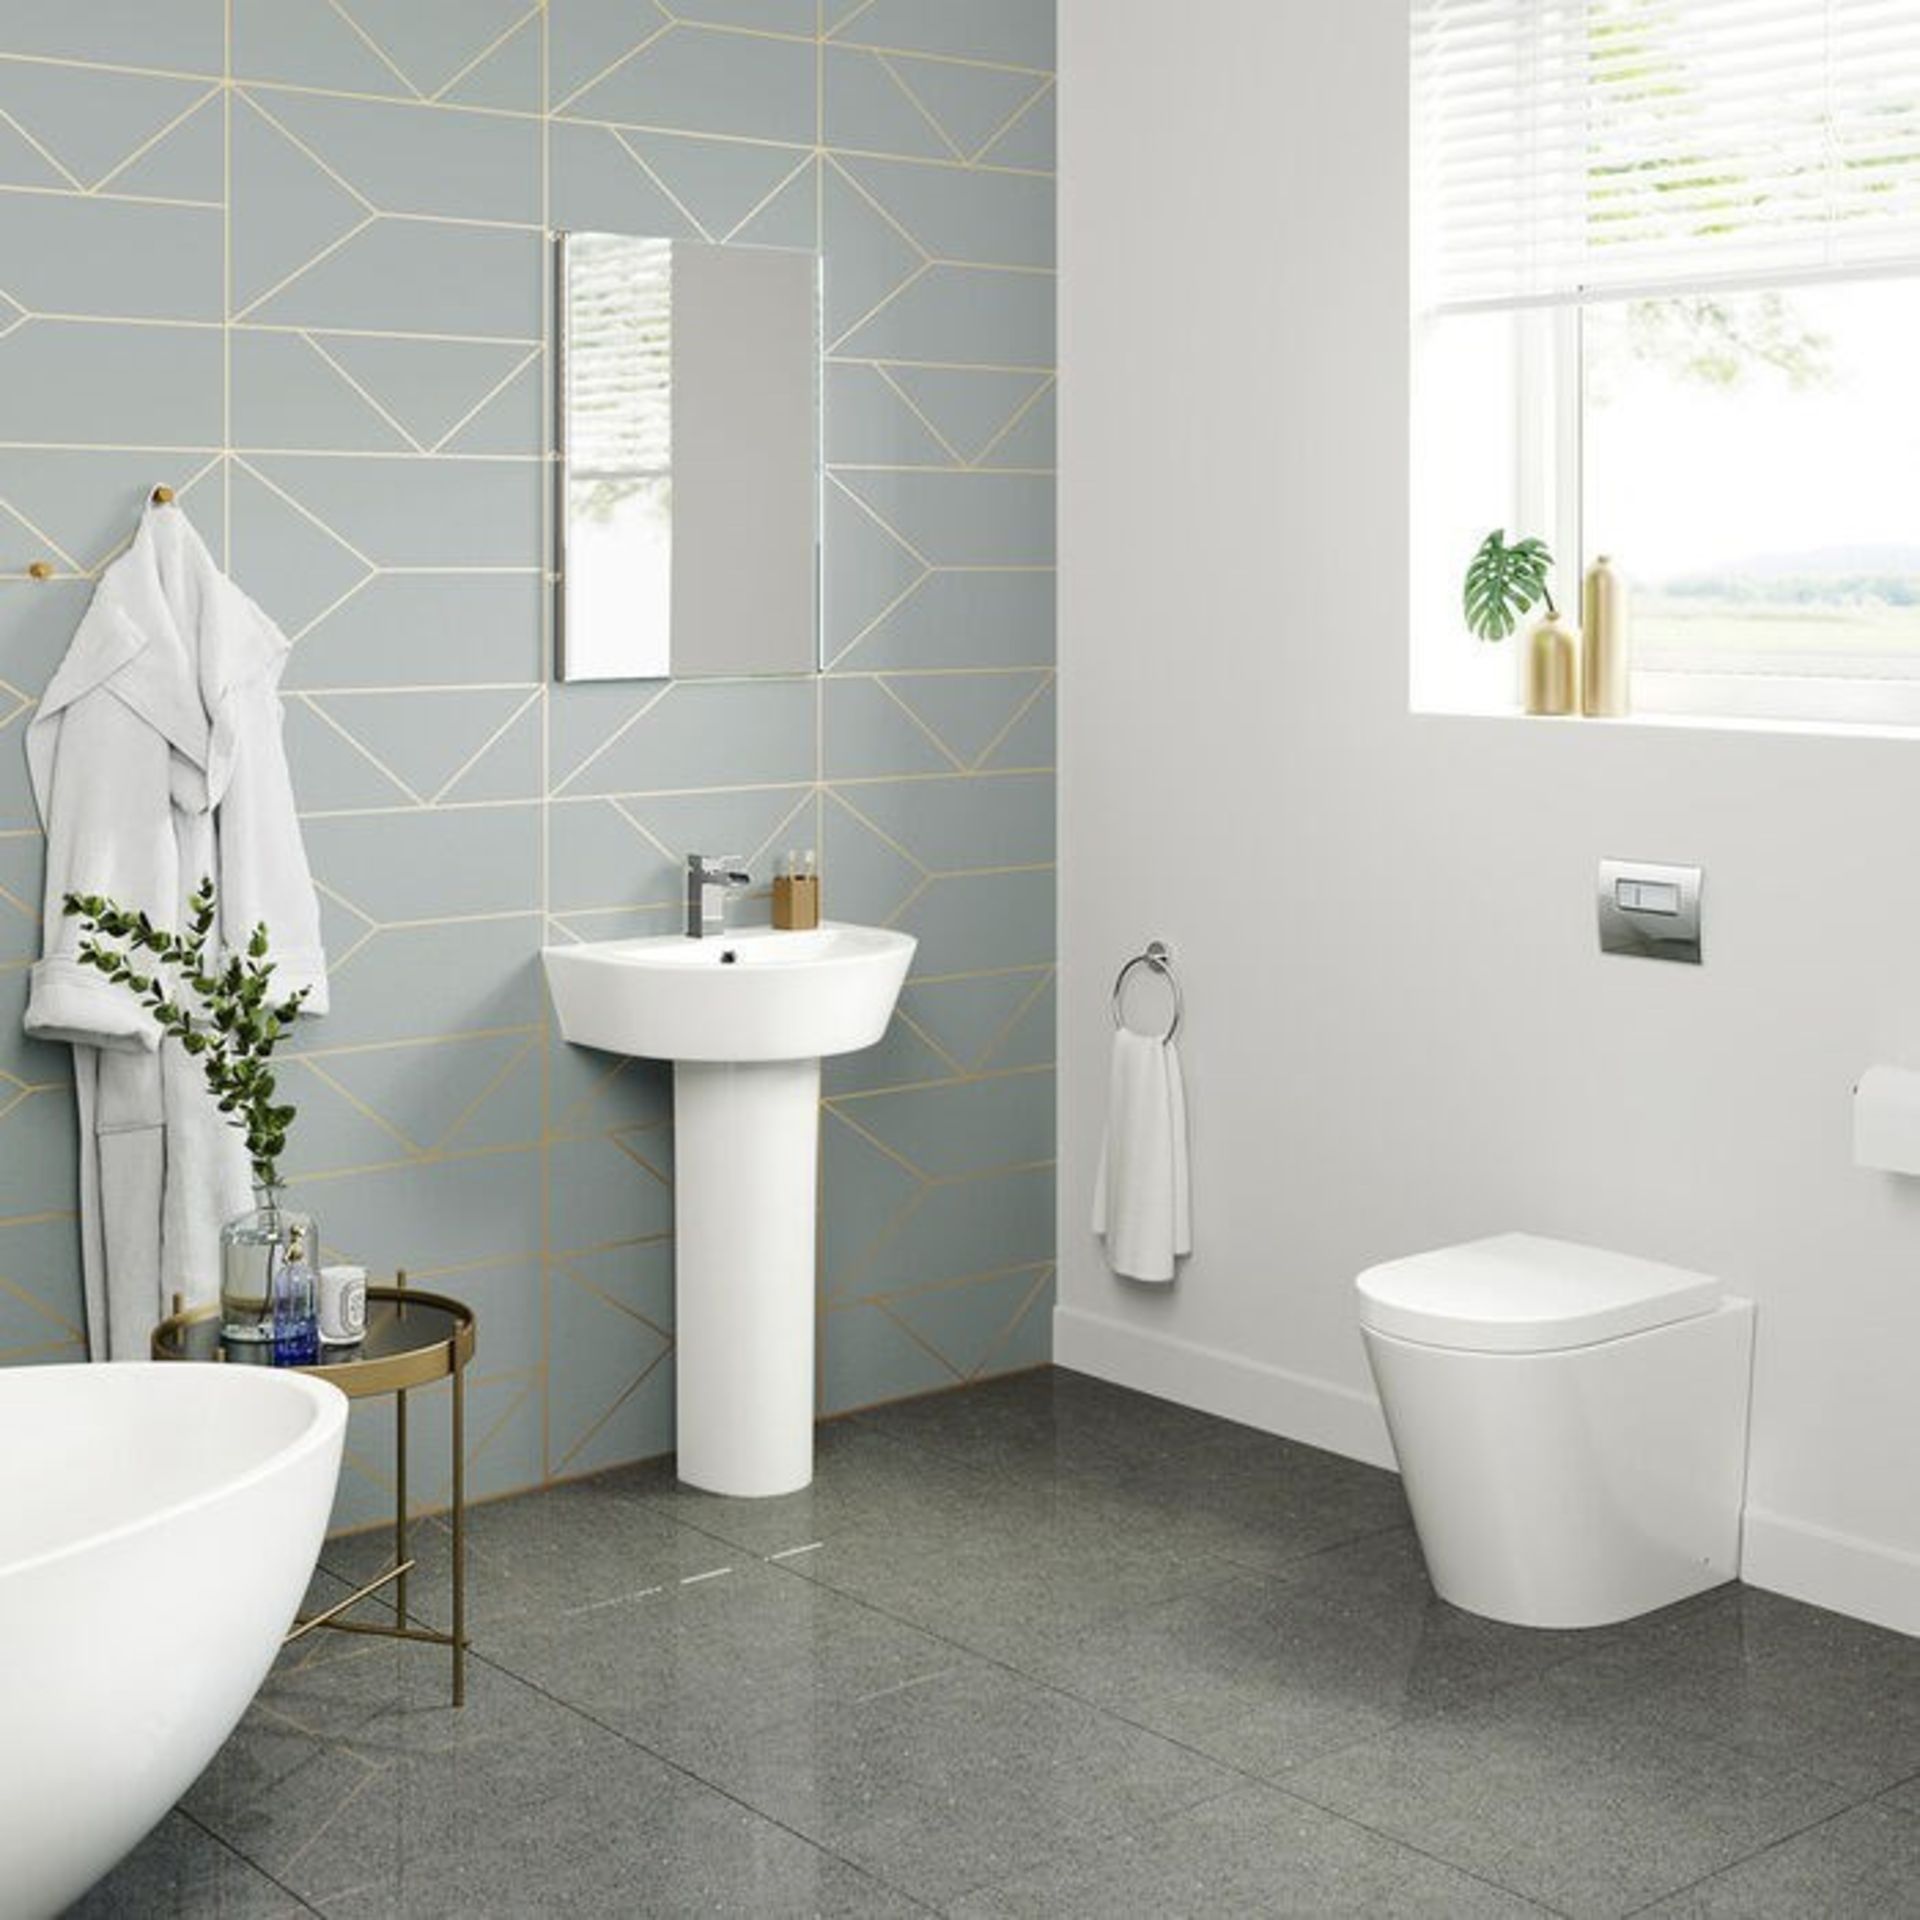 NEW & BOXED Lyon Back To Wall Toilet with Soft Close Seat. RRP £349.99 each. Our Lyon back to... - Image 2 of 2